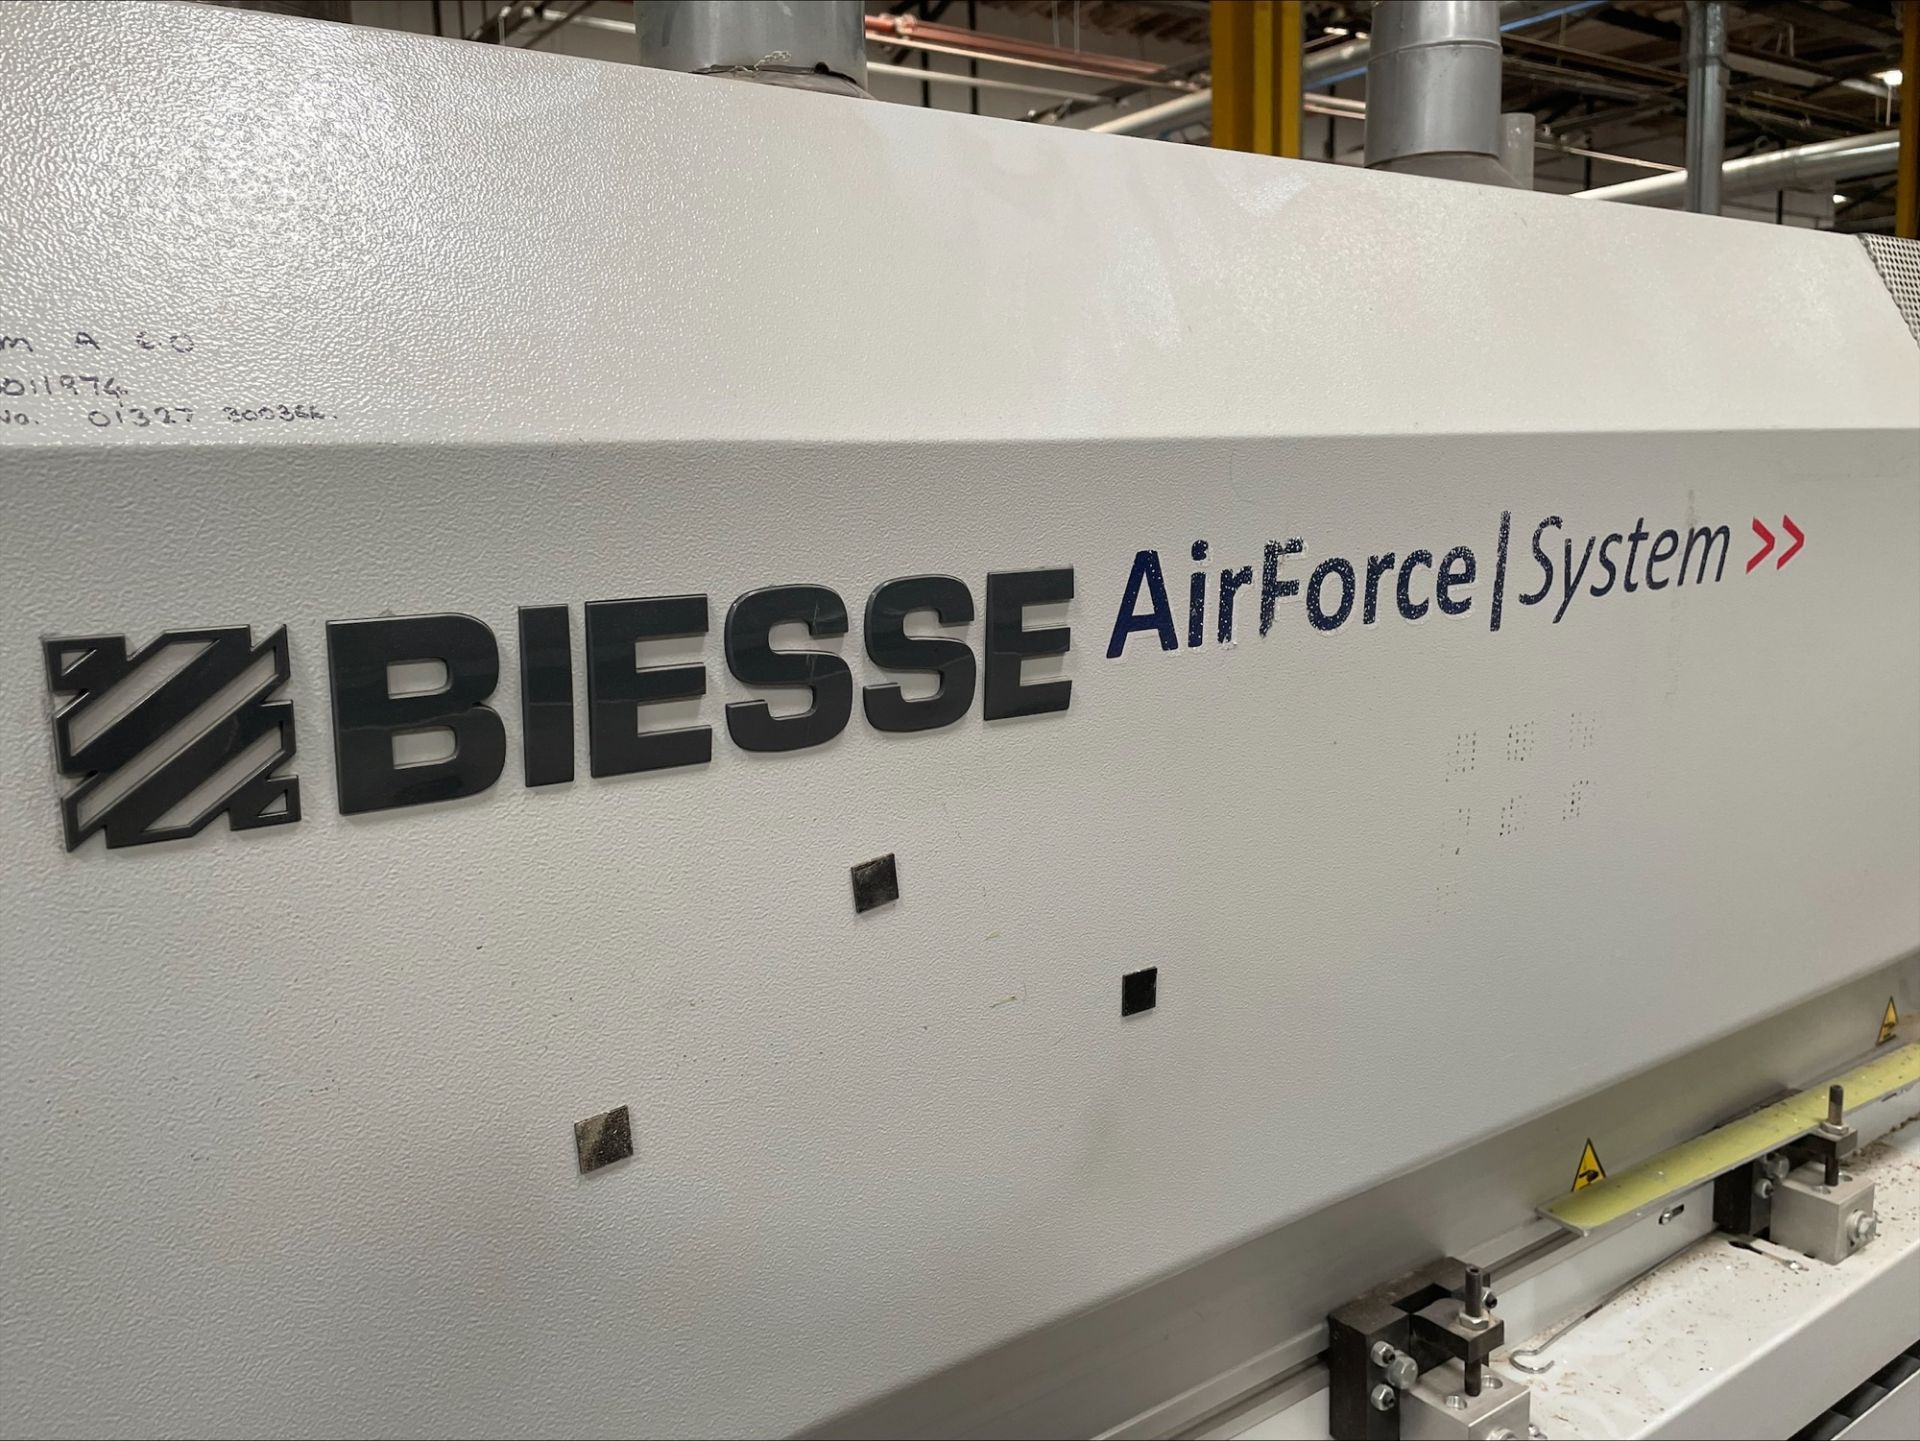 Biesse Stream A / 6.0 automatic single sided edgebander, Serial No. 1000014053 (2016), machine - Image 3 of 12